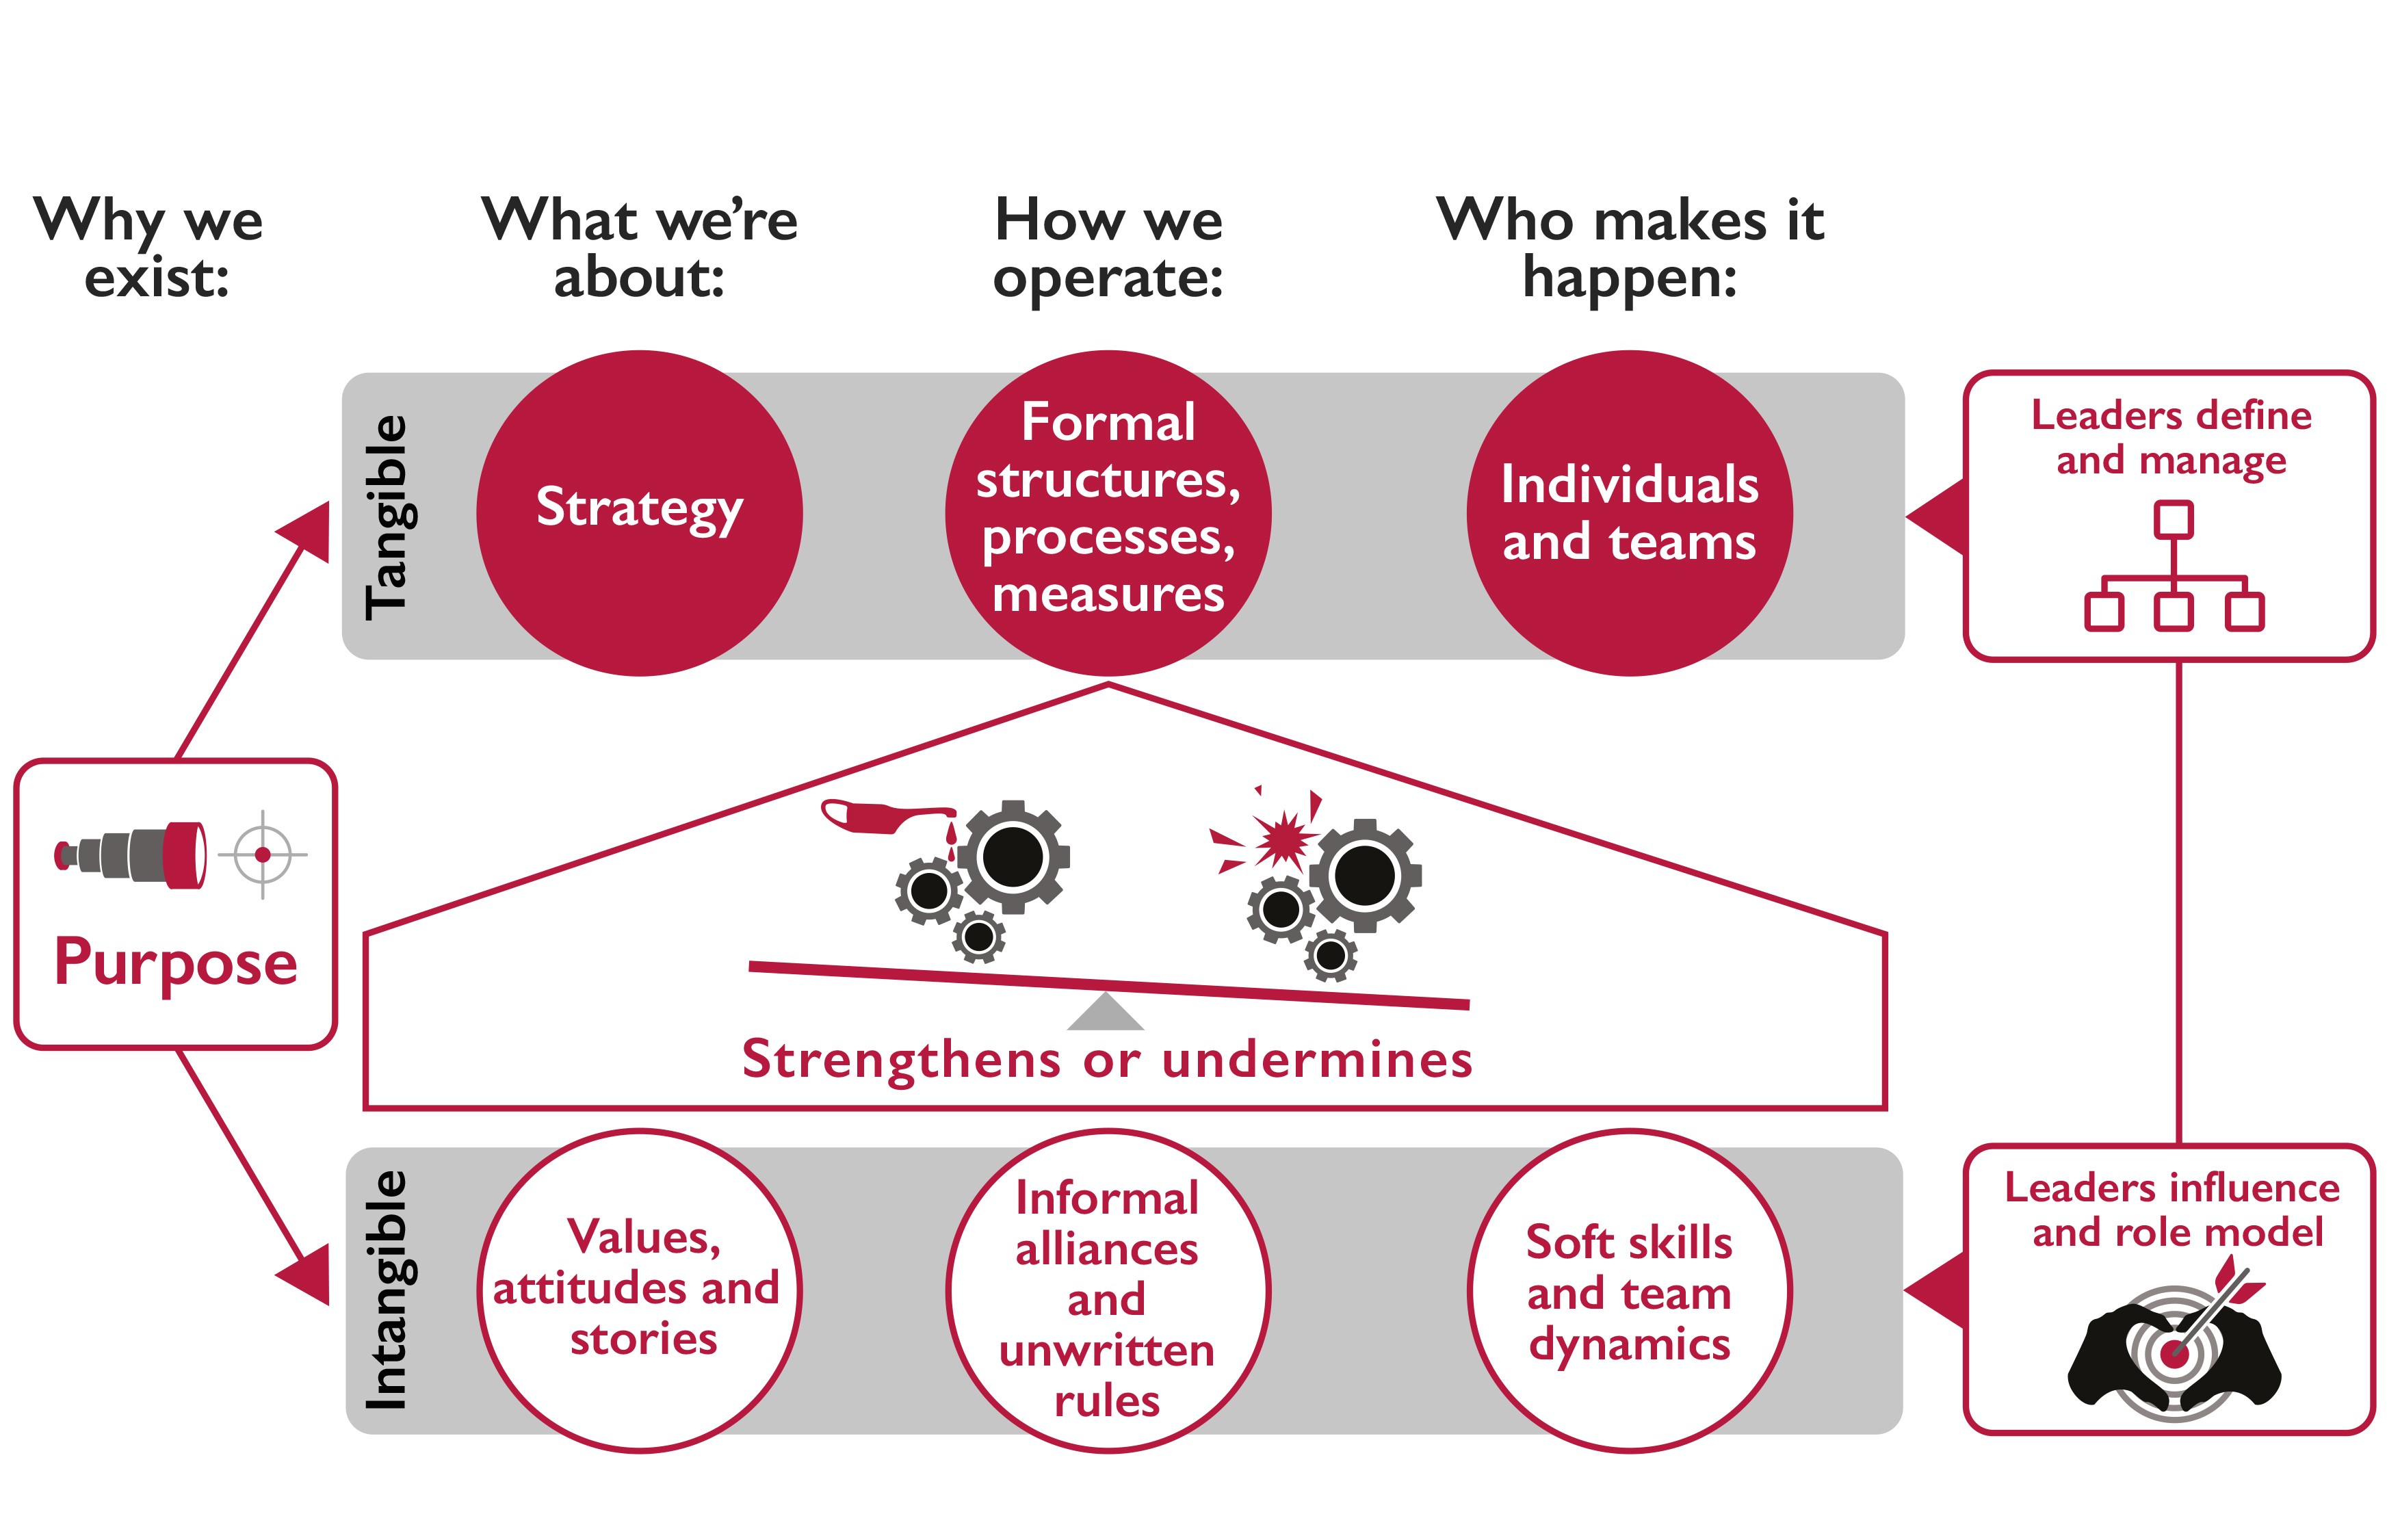 The Berkeley Partnership's graphic showing a framework for maximising organizational effectiveness through focusing on both tangible and intangible elements